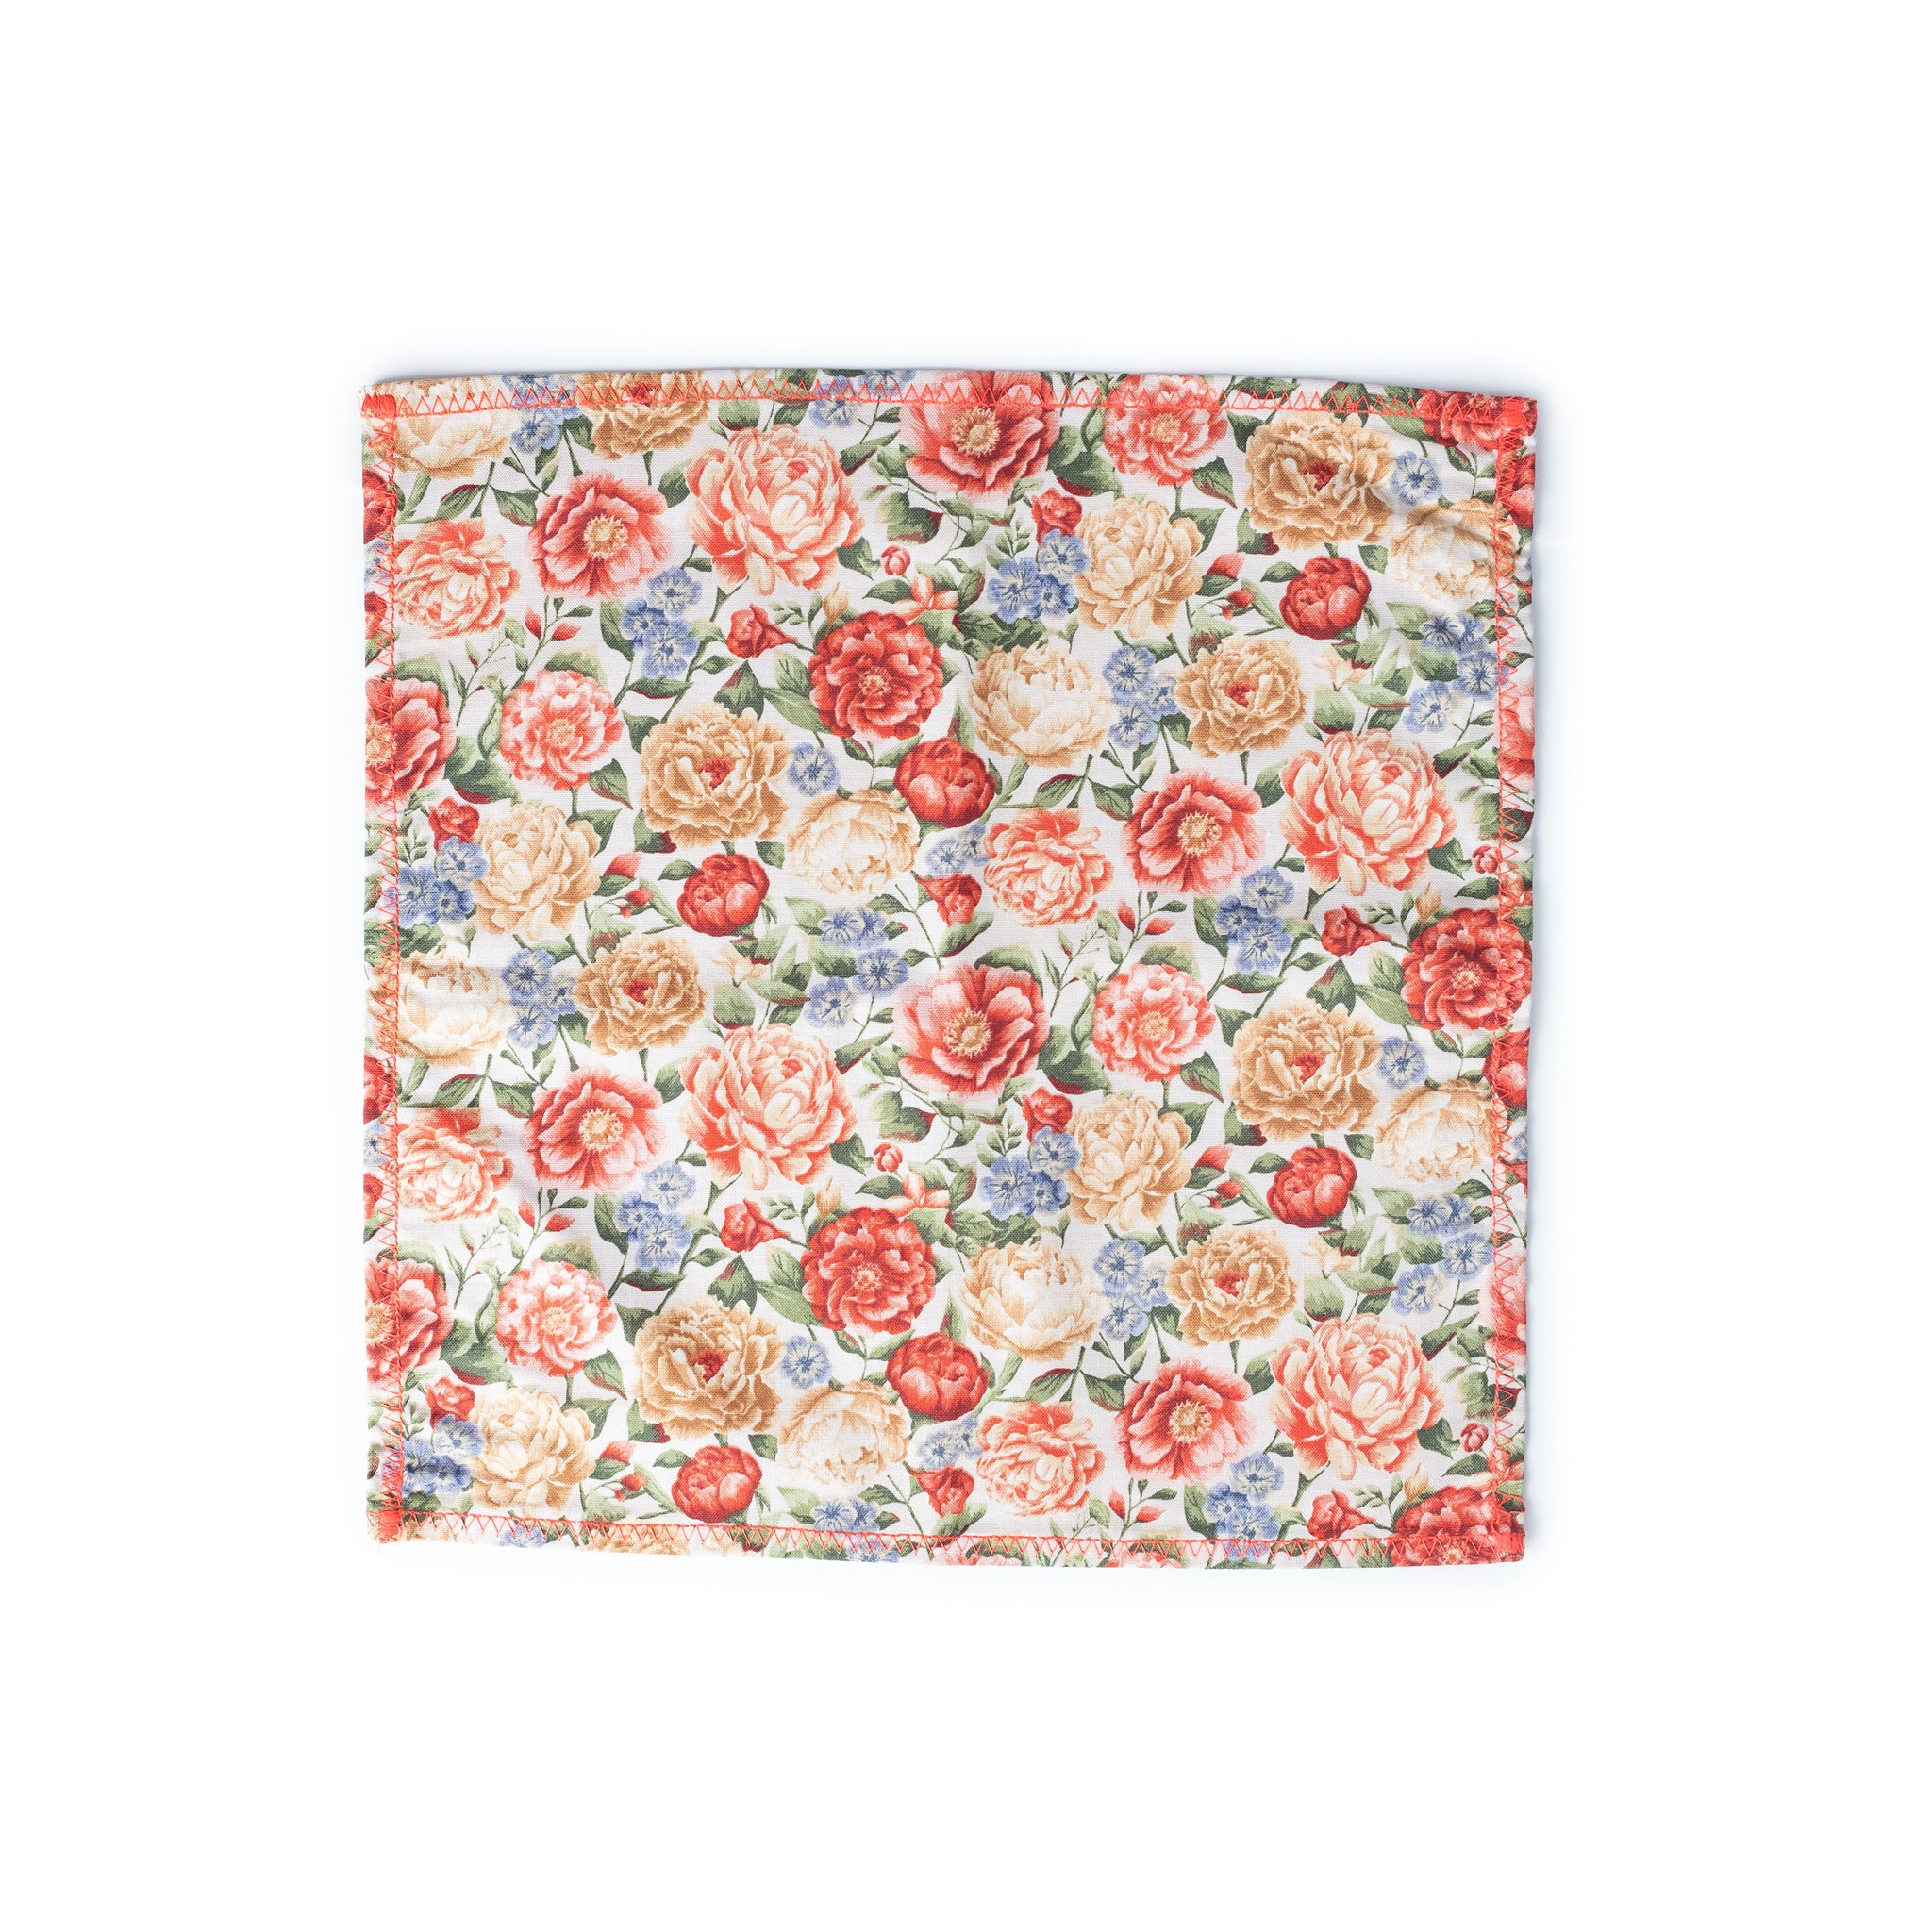 Flower Print Pocket Square | Cute Pocket Square | House of Dappierre